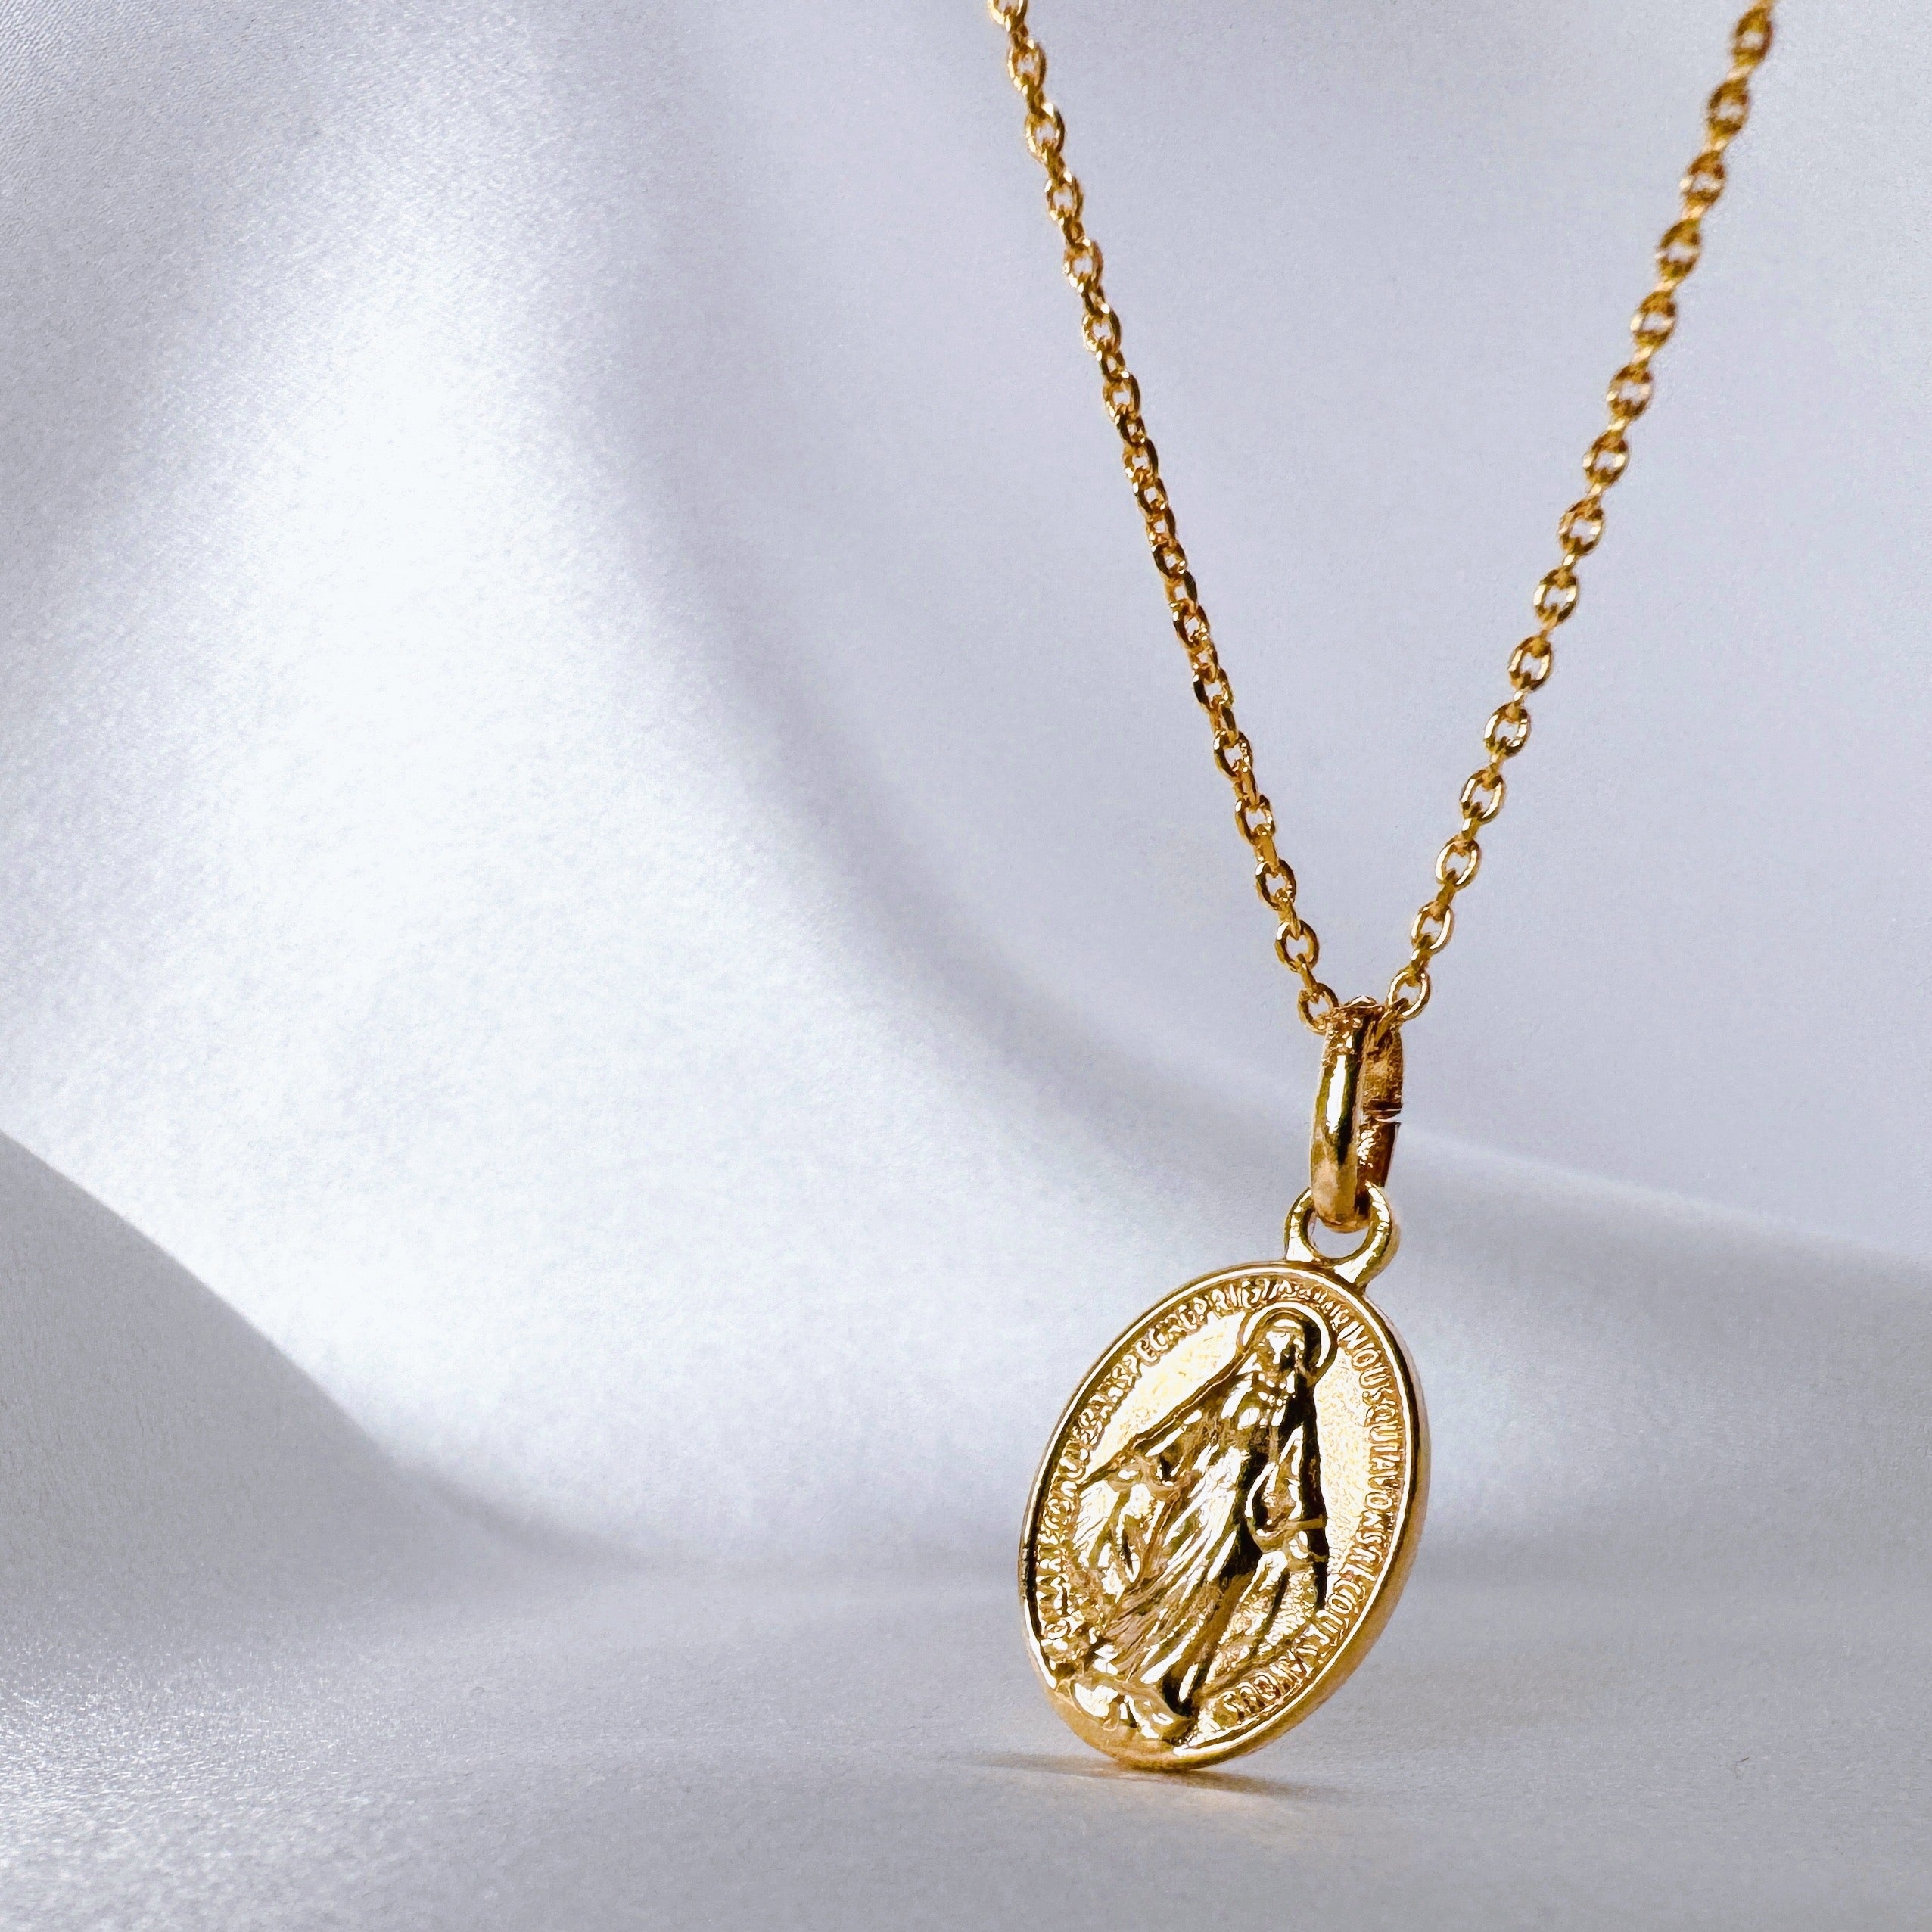 Gold-plated “Miraculous Virgin” necklace